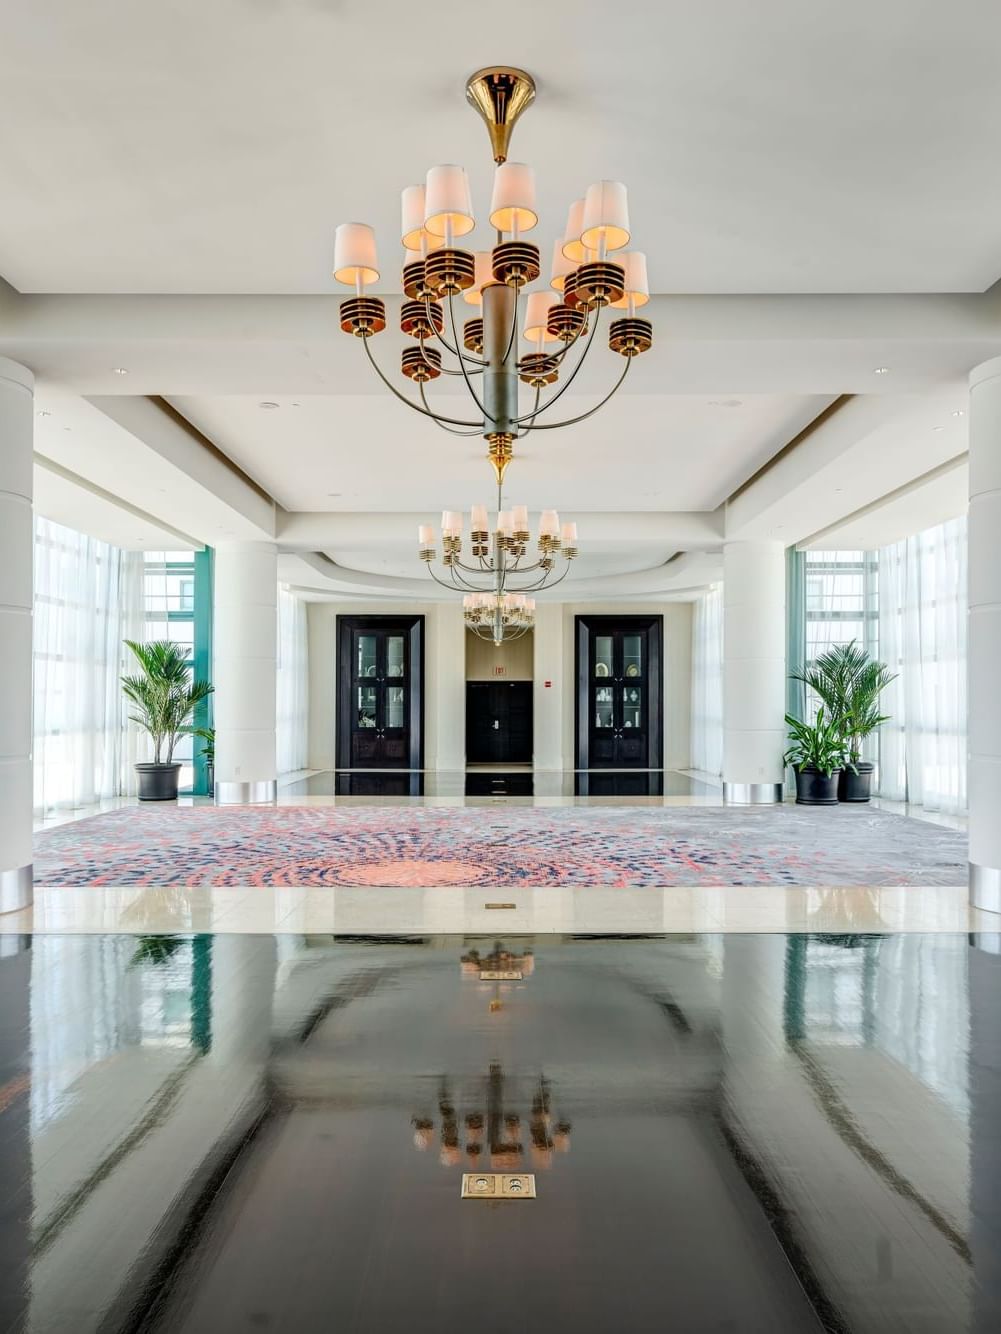 The grand entrance of the Executive Lounge, The Diplomat Resort